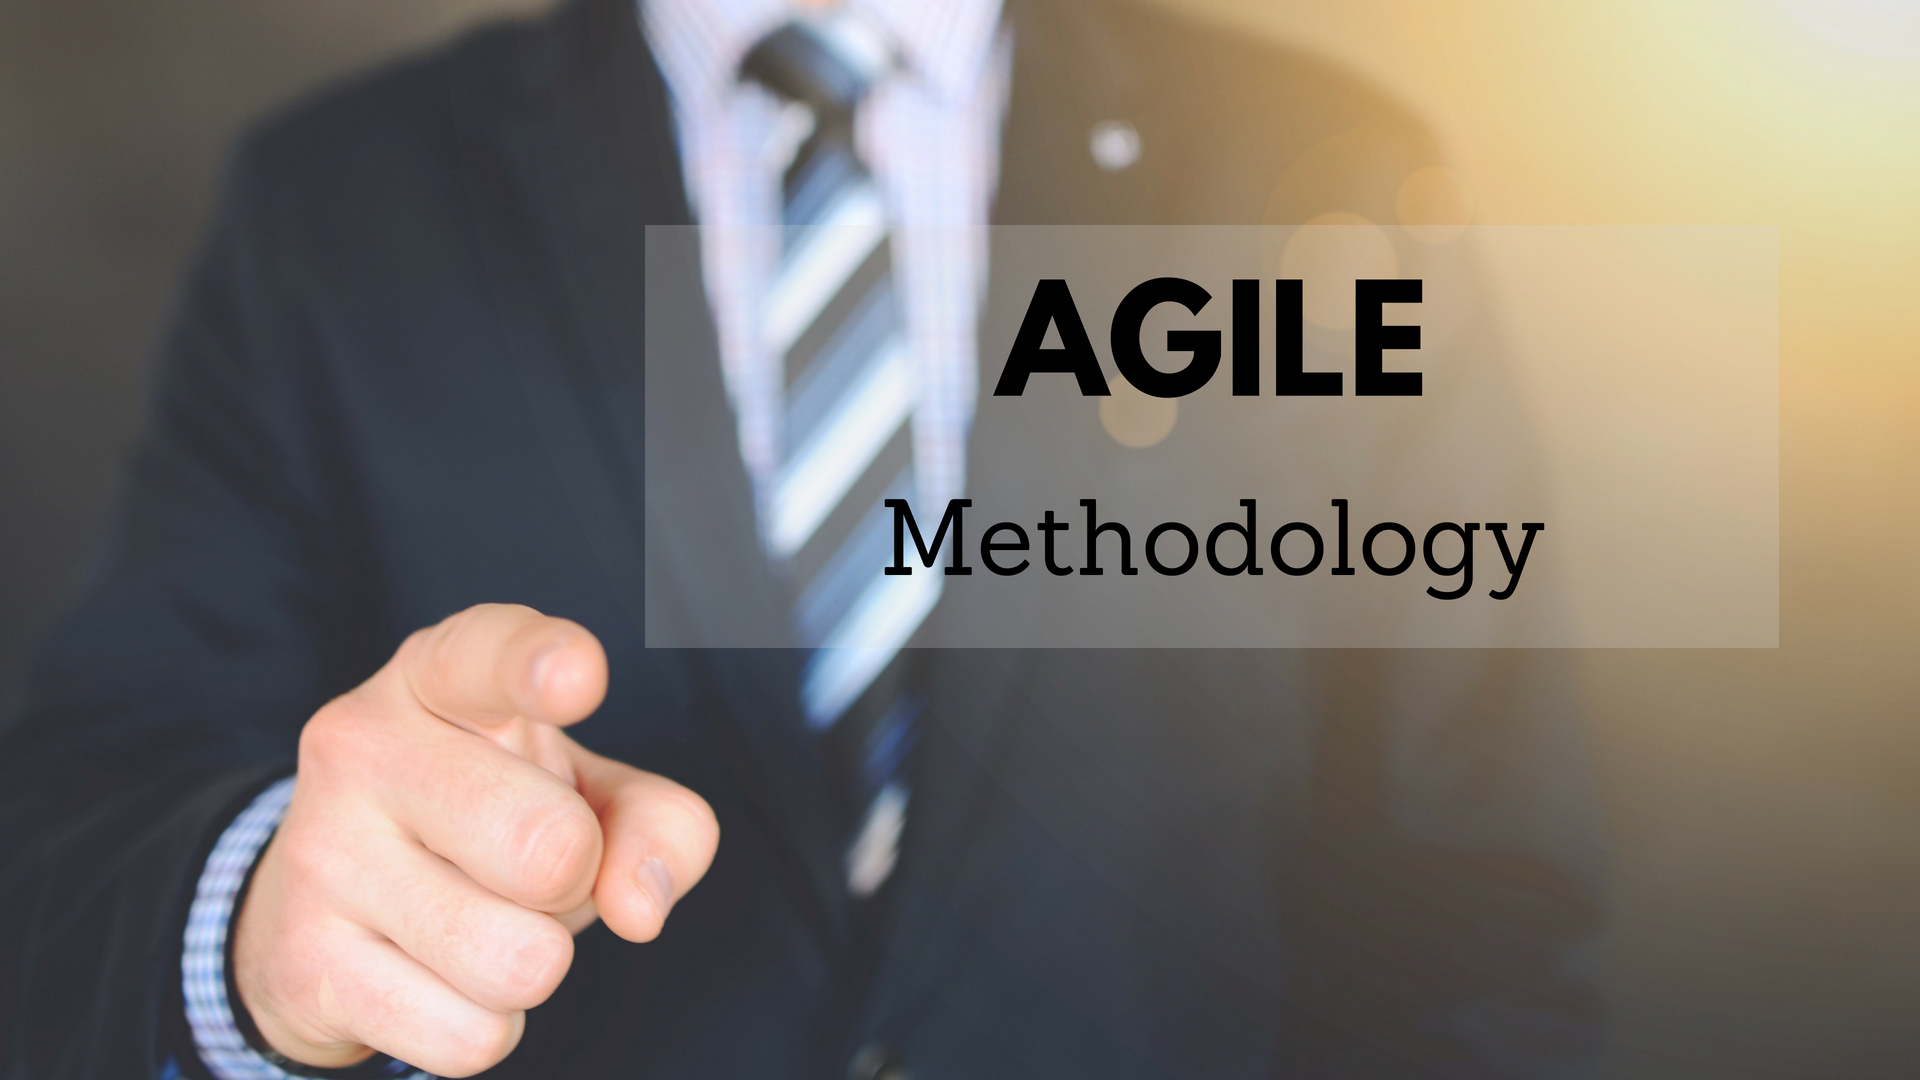 Agile methodology: advantages and disadvantages of an innovative method